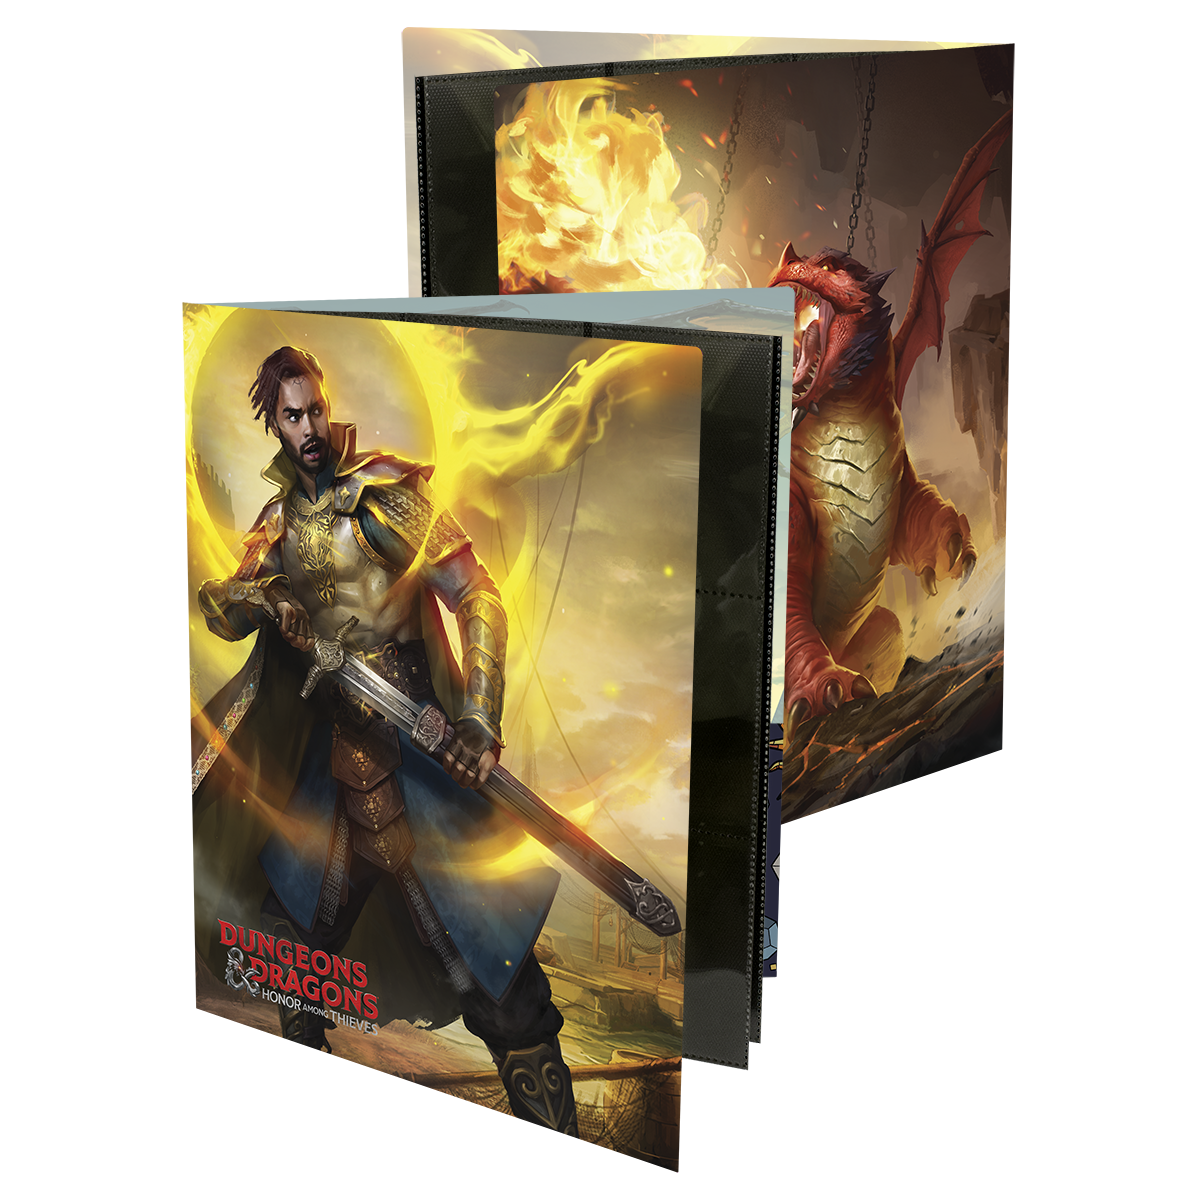 Claim Honor Among Thieves Bundle now! - D&D Beyond